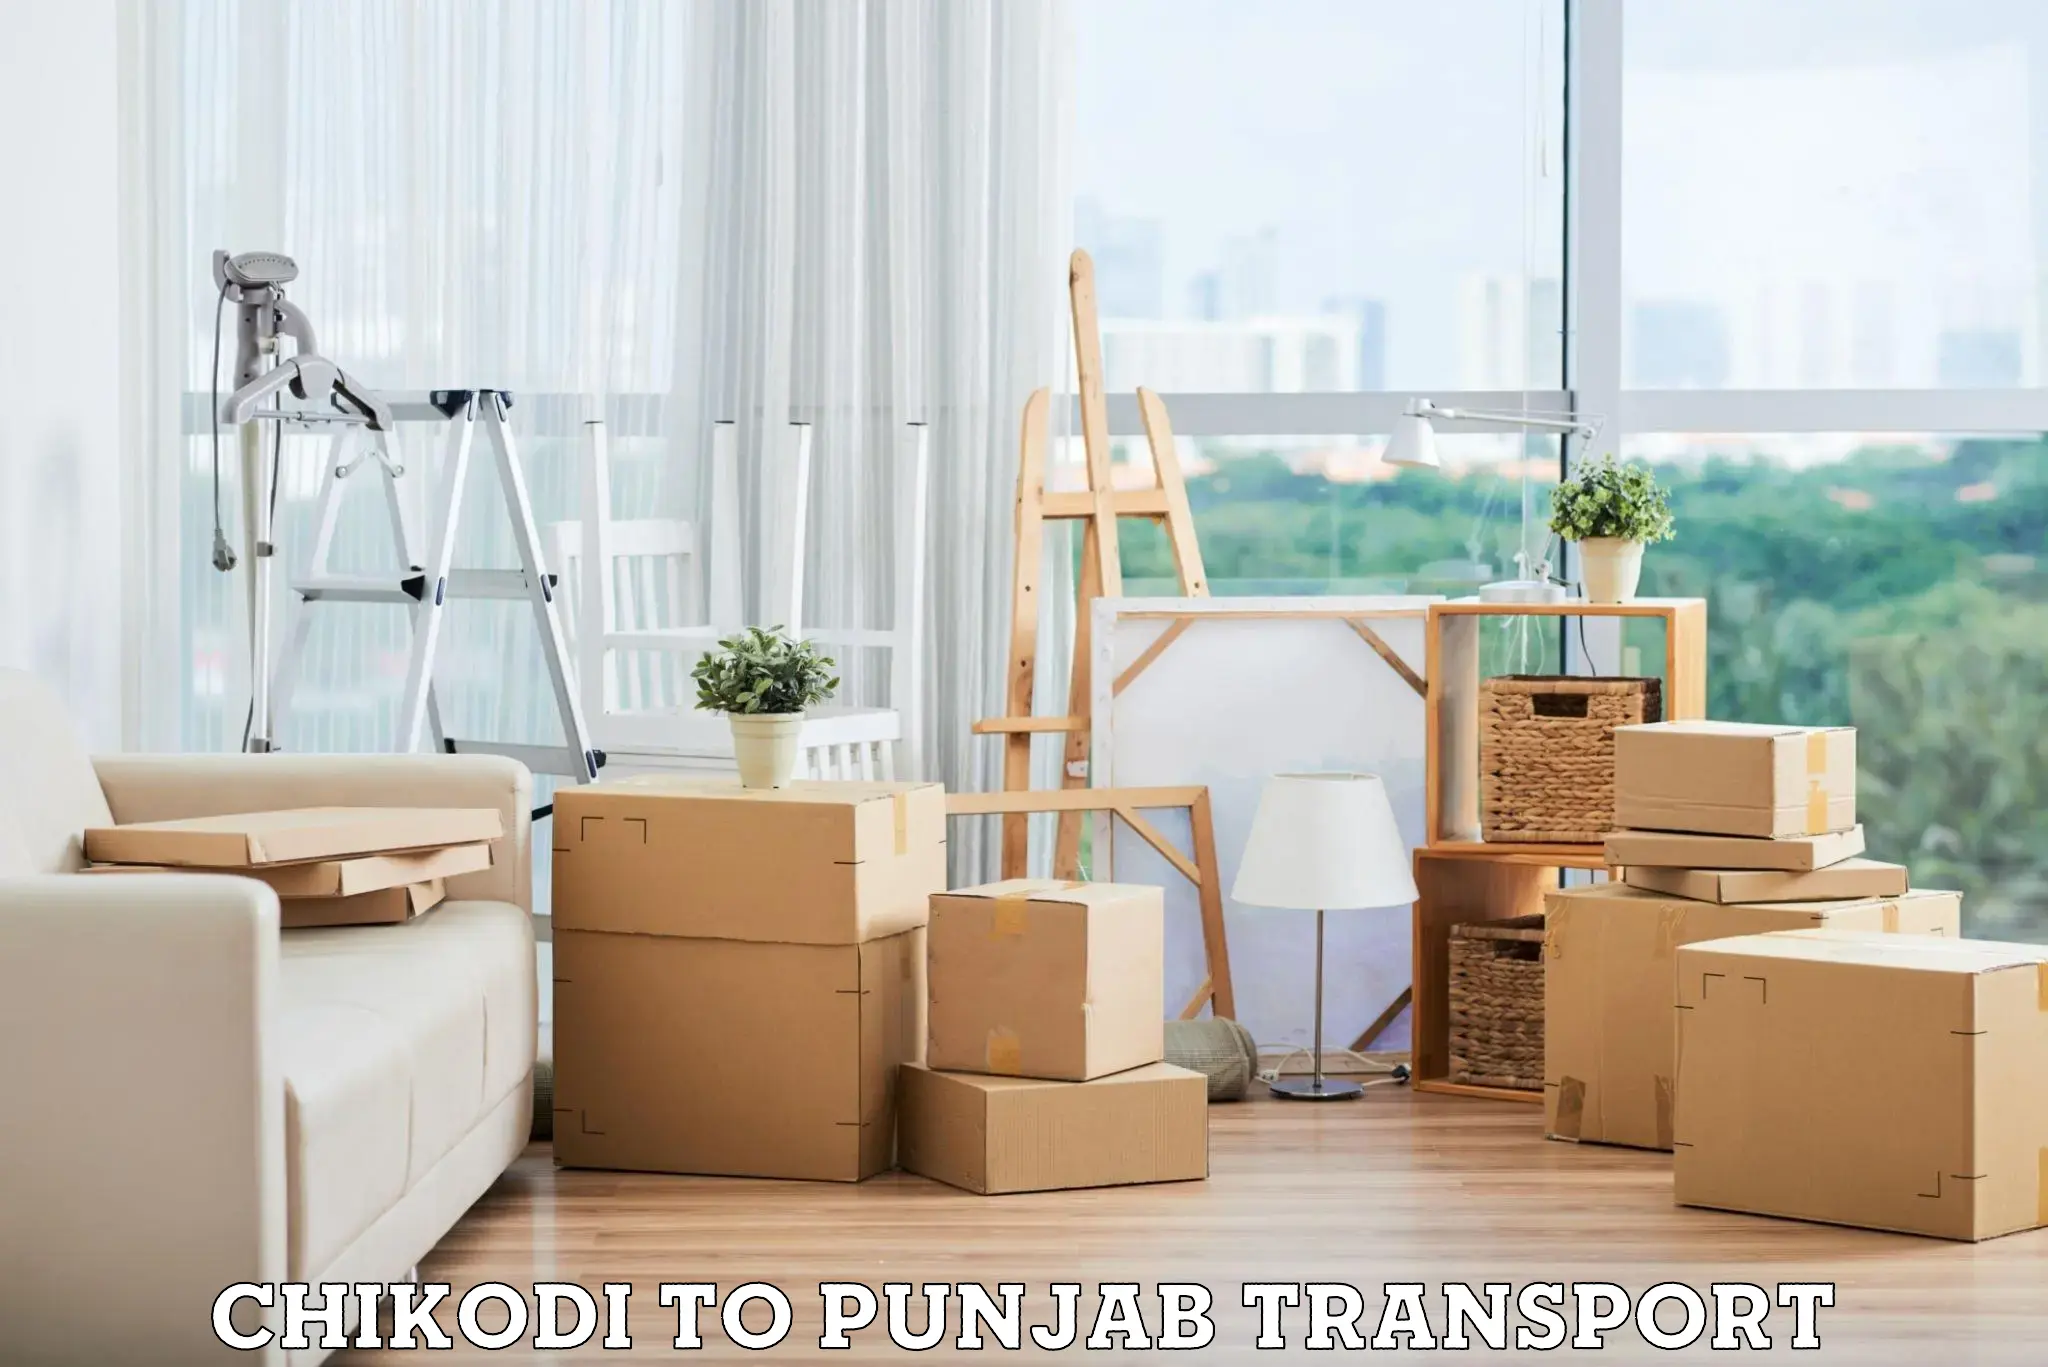 Commercial transport service Chikodi to Mohali